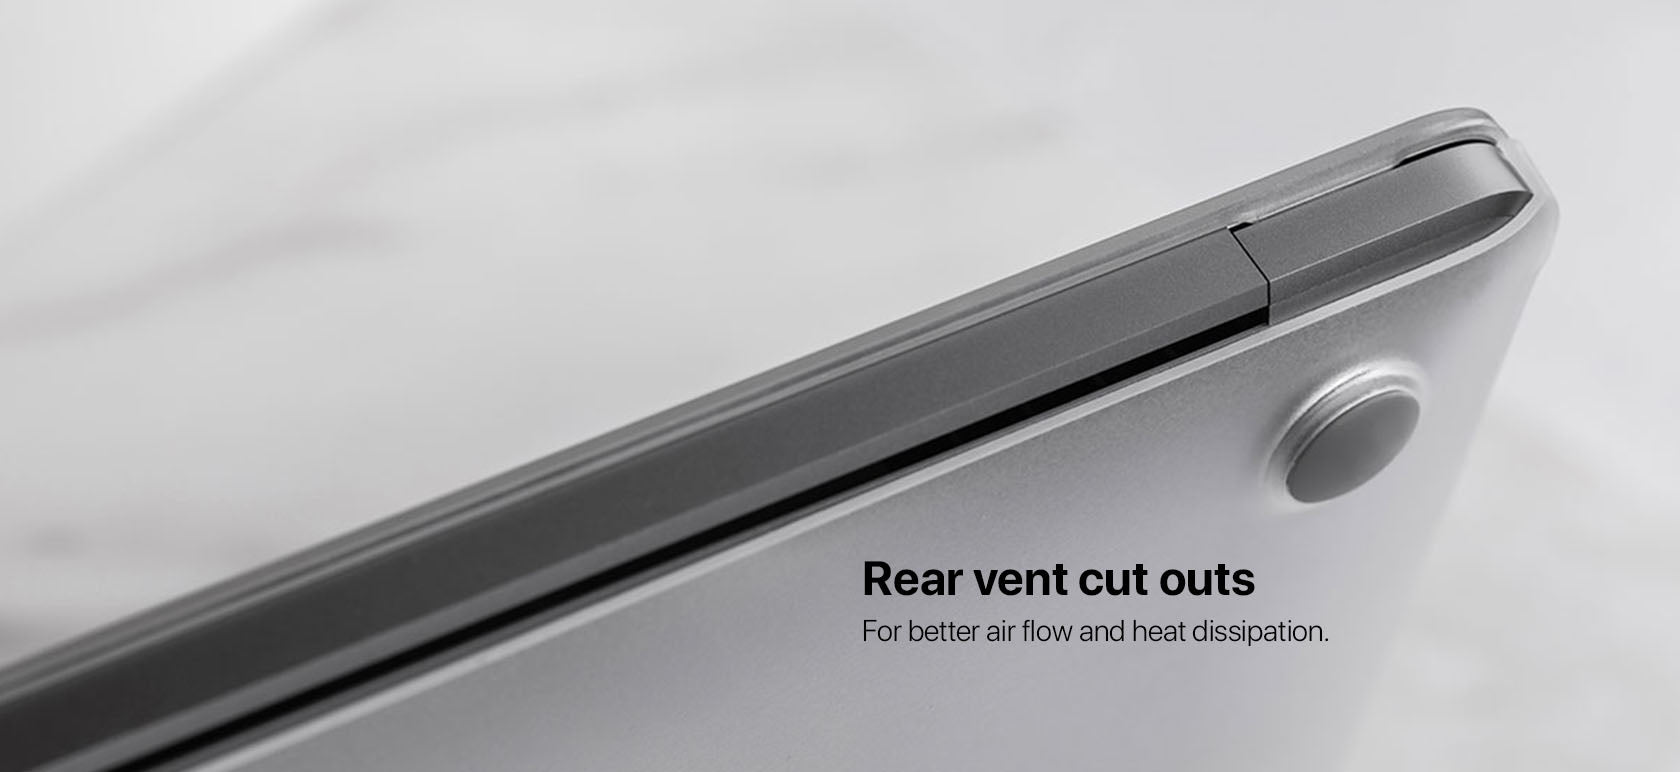 Rear vent cut outs For better air flow and heat dissipation.